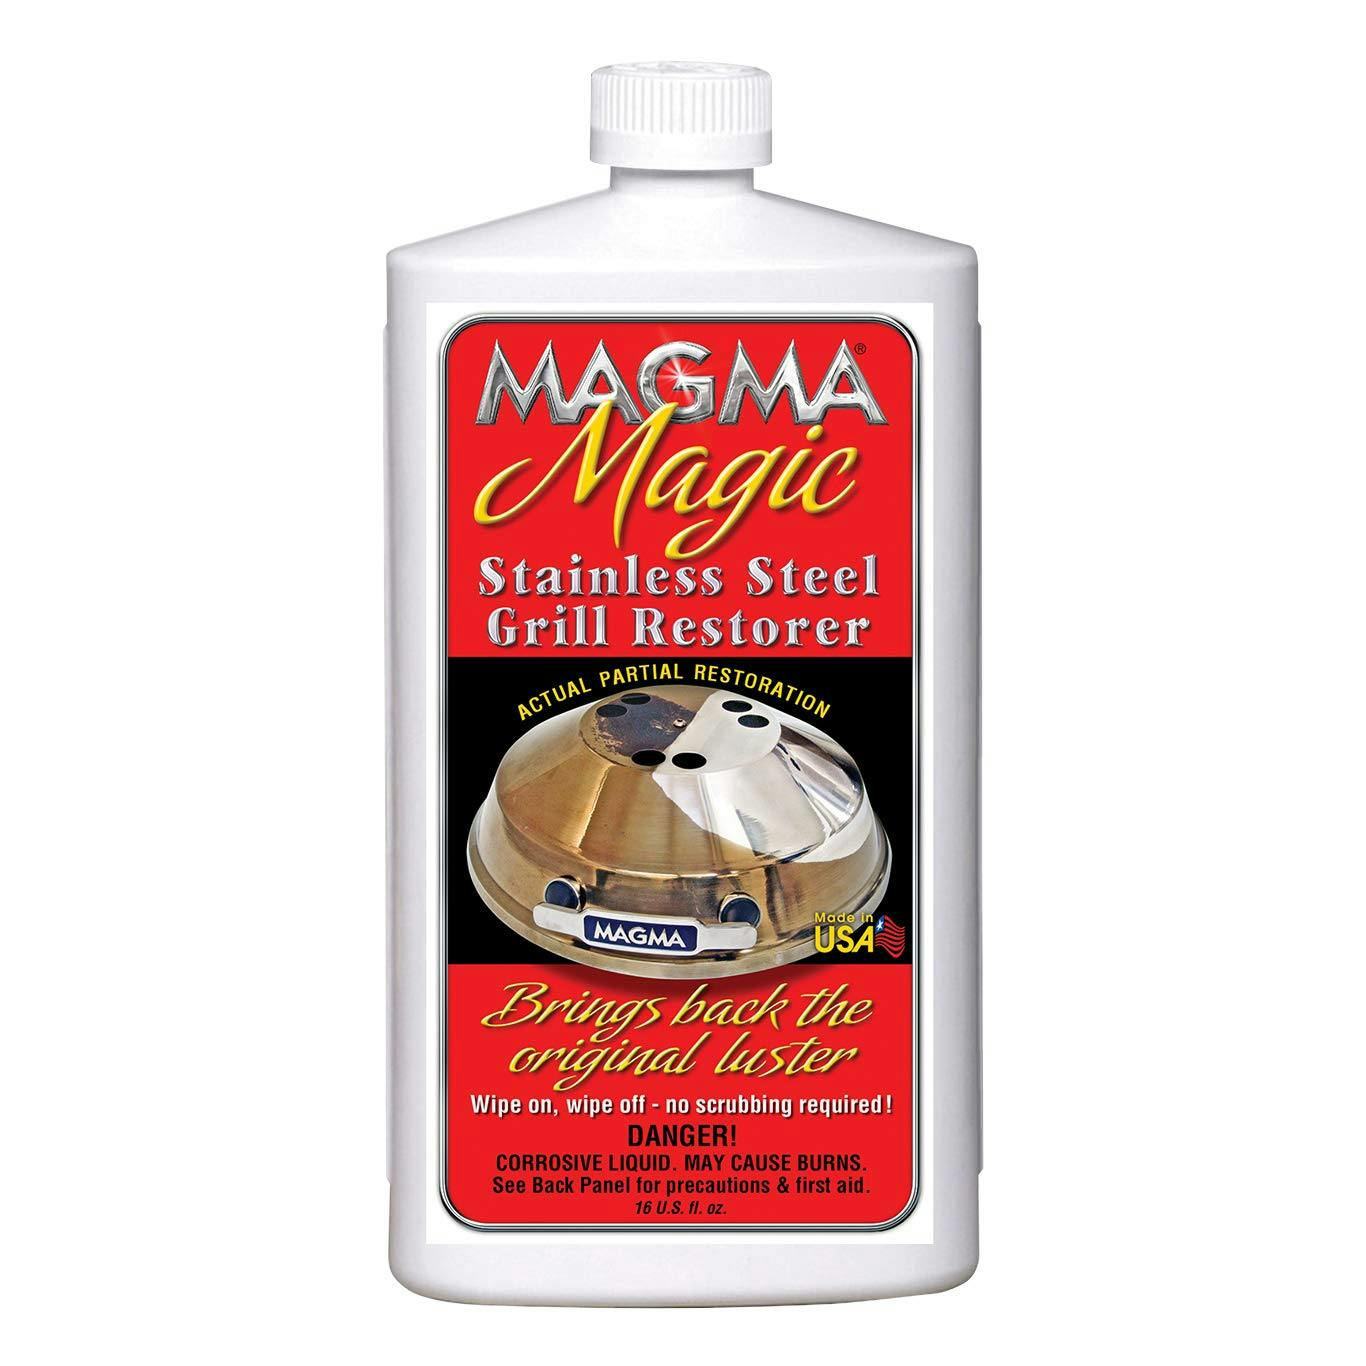 Magma Magic Grill Restorer and Cleaner